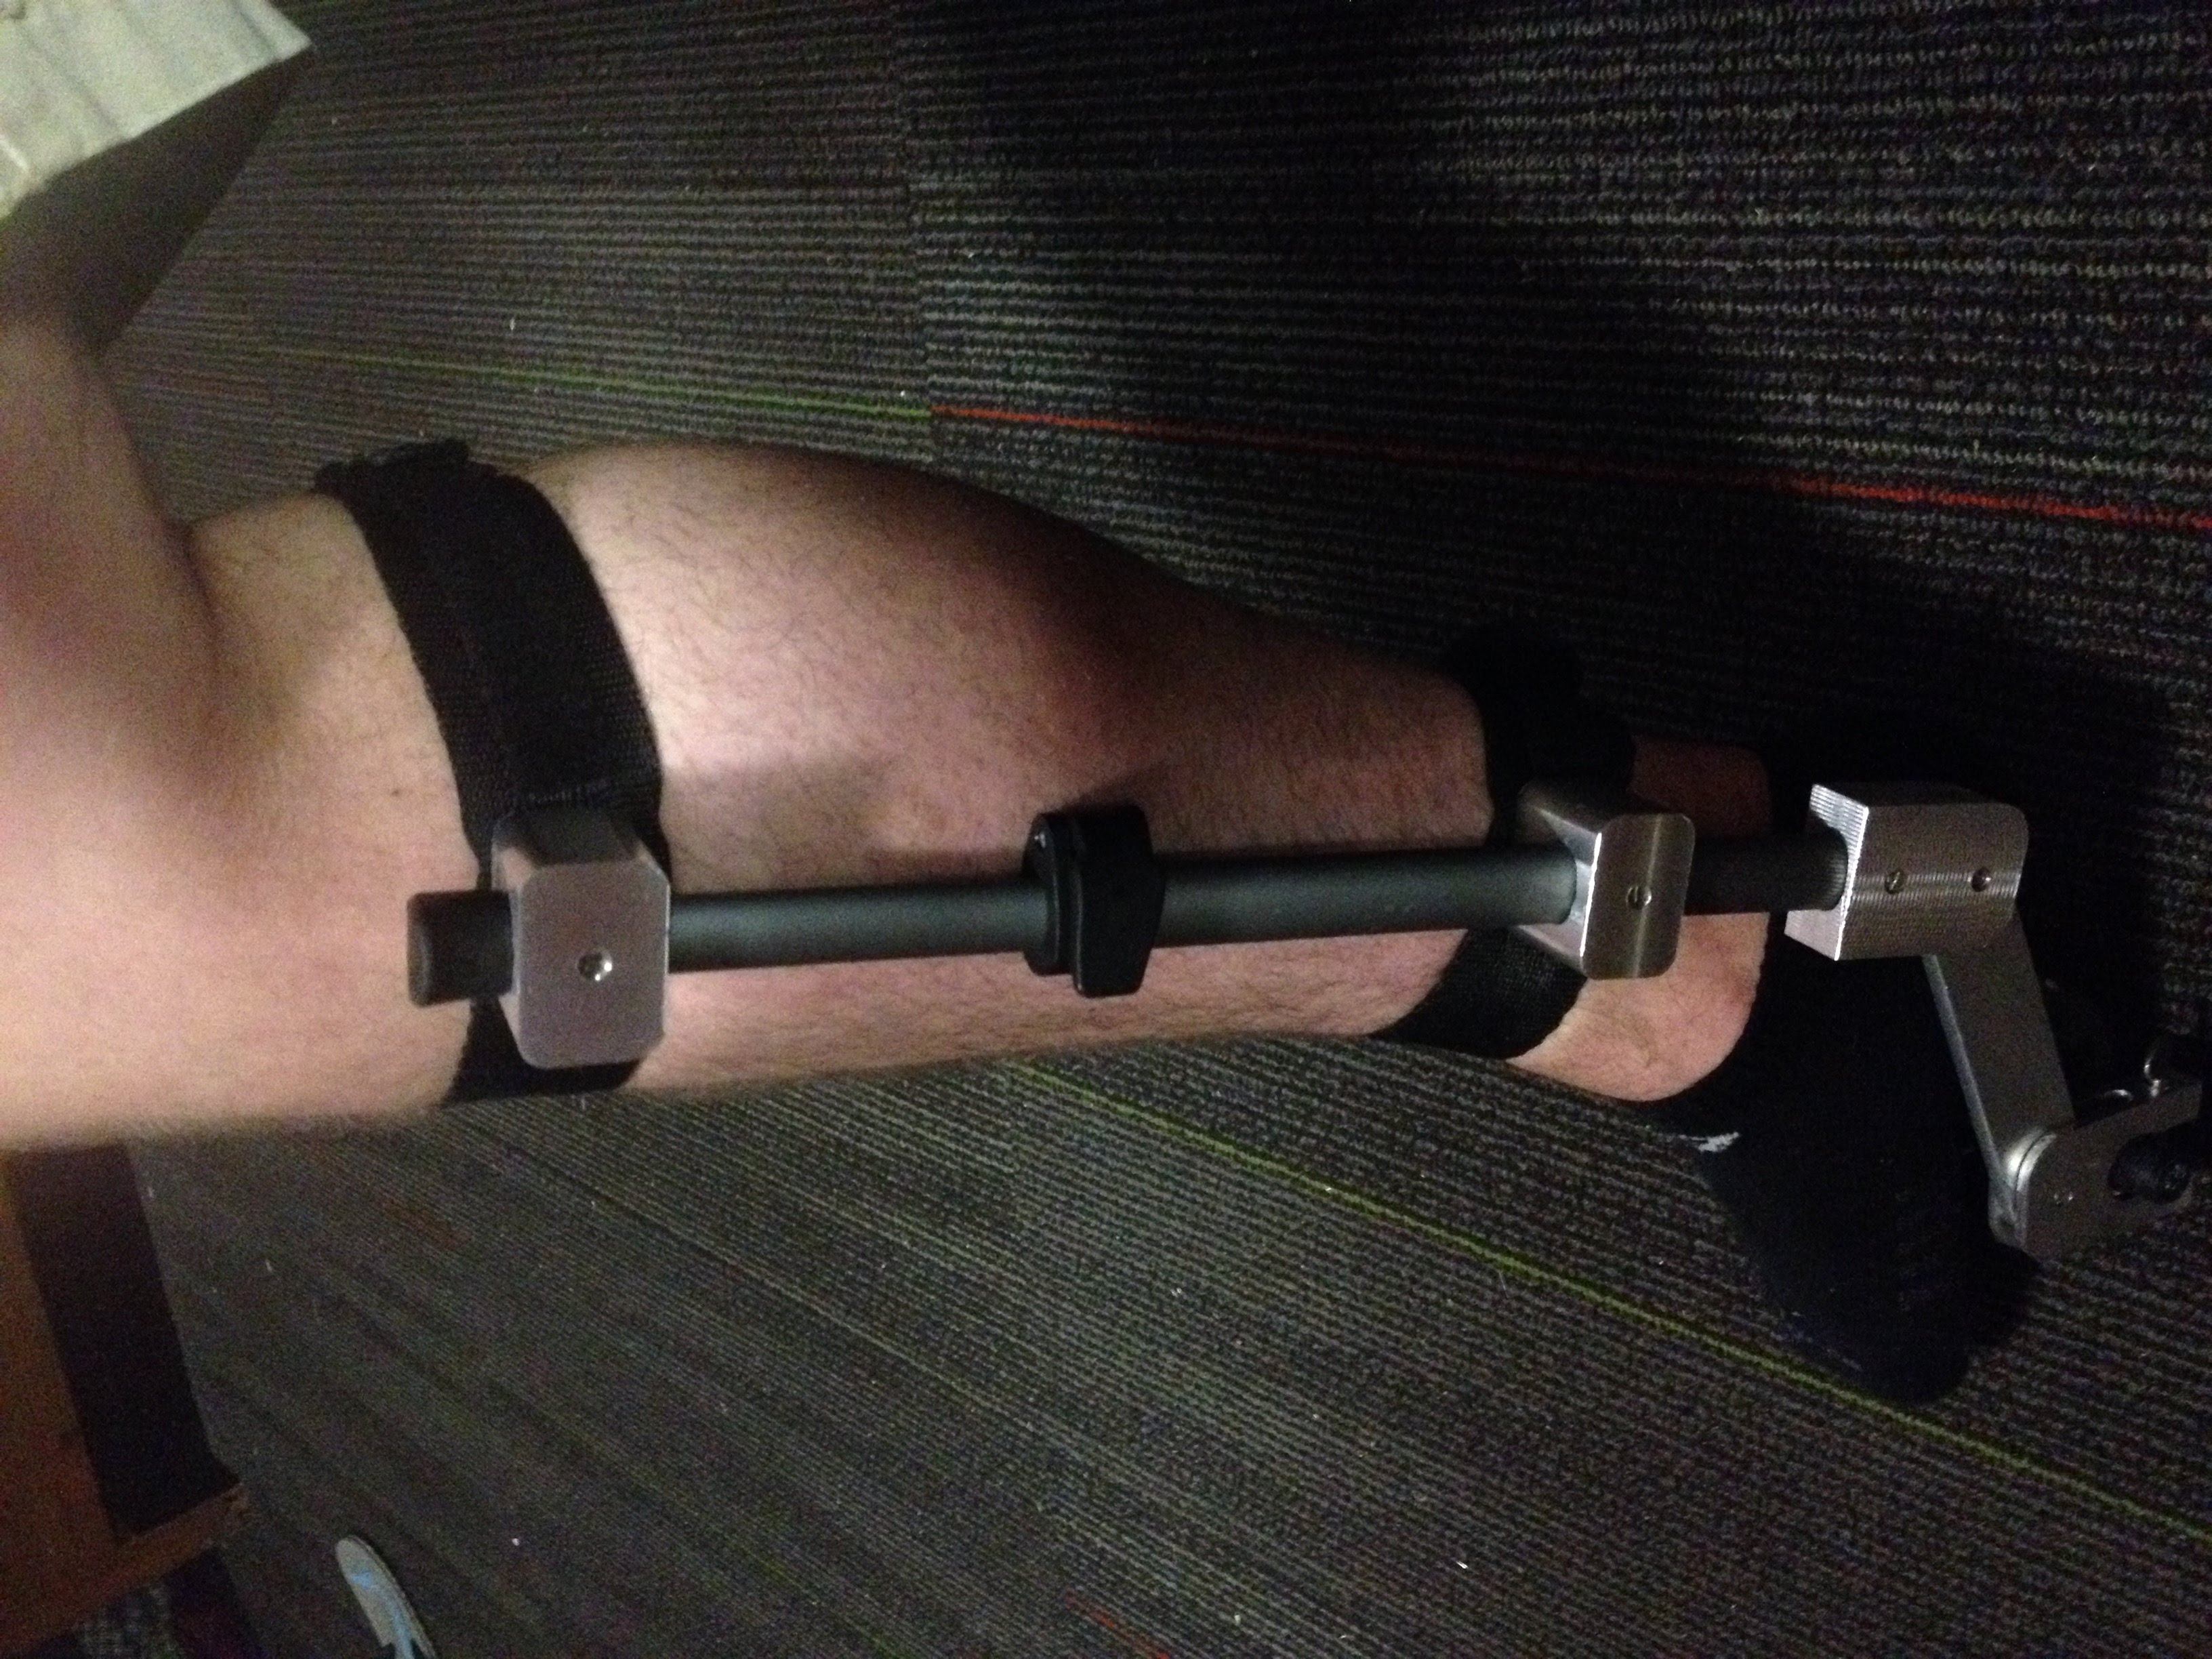 the prototype modeled on a person's leg